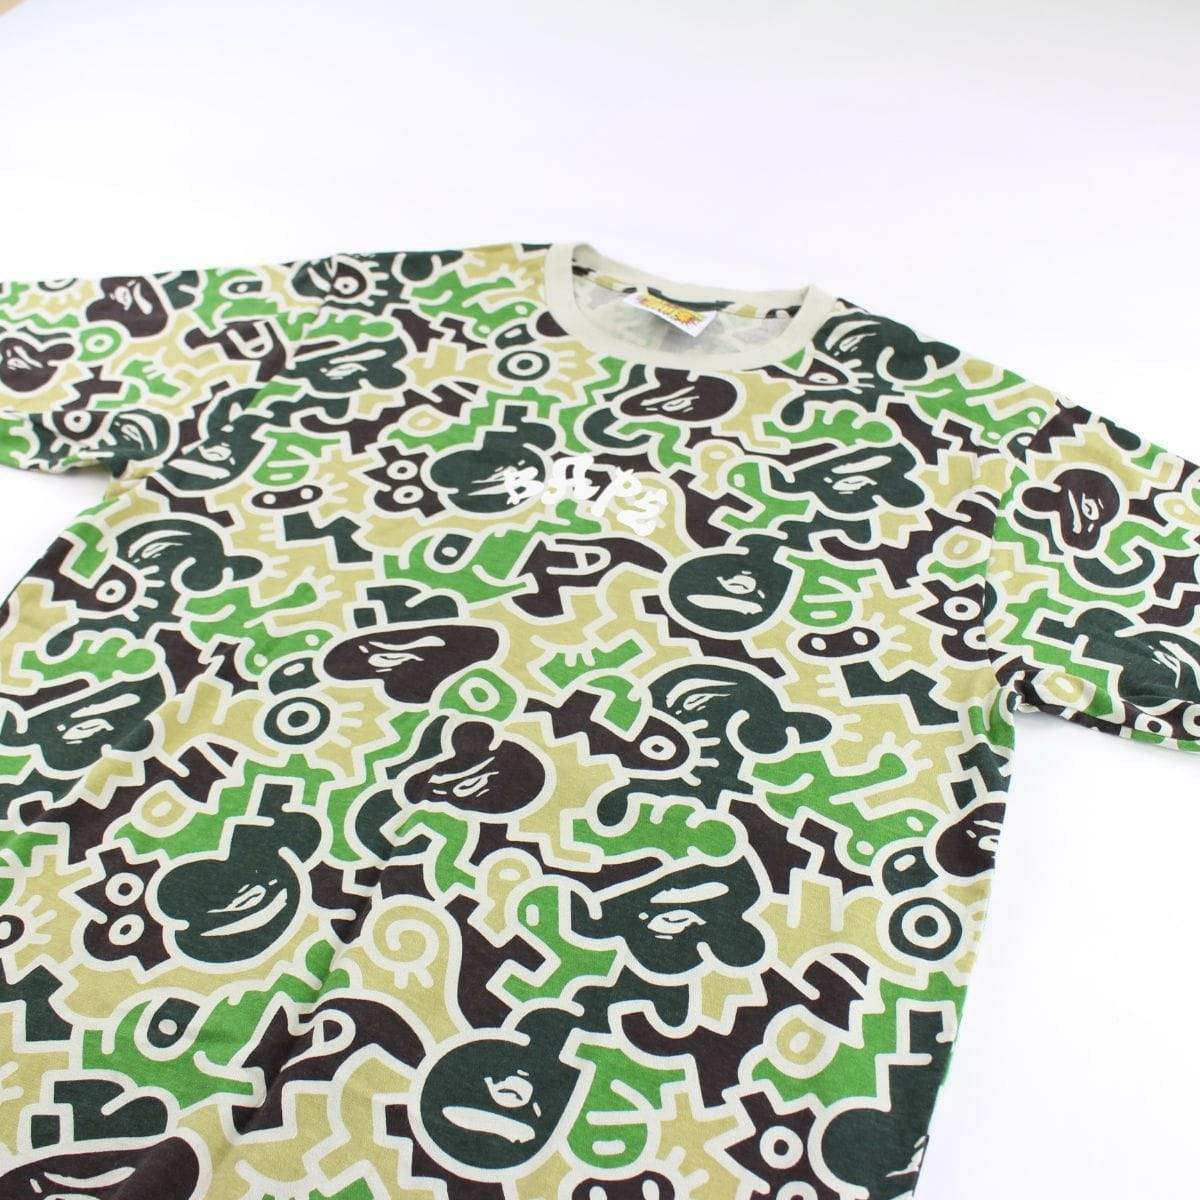 Bape Green Keith Haring Style Milo Tee - SaruGeneral